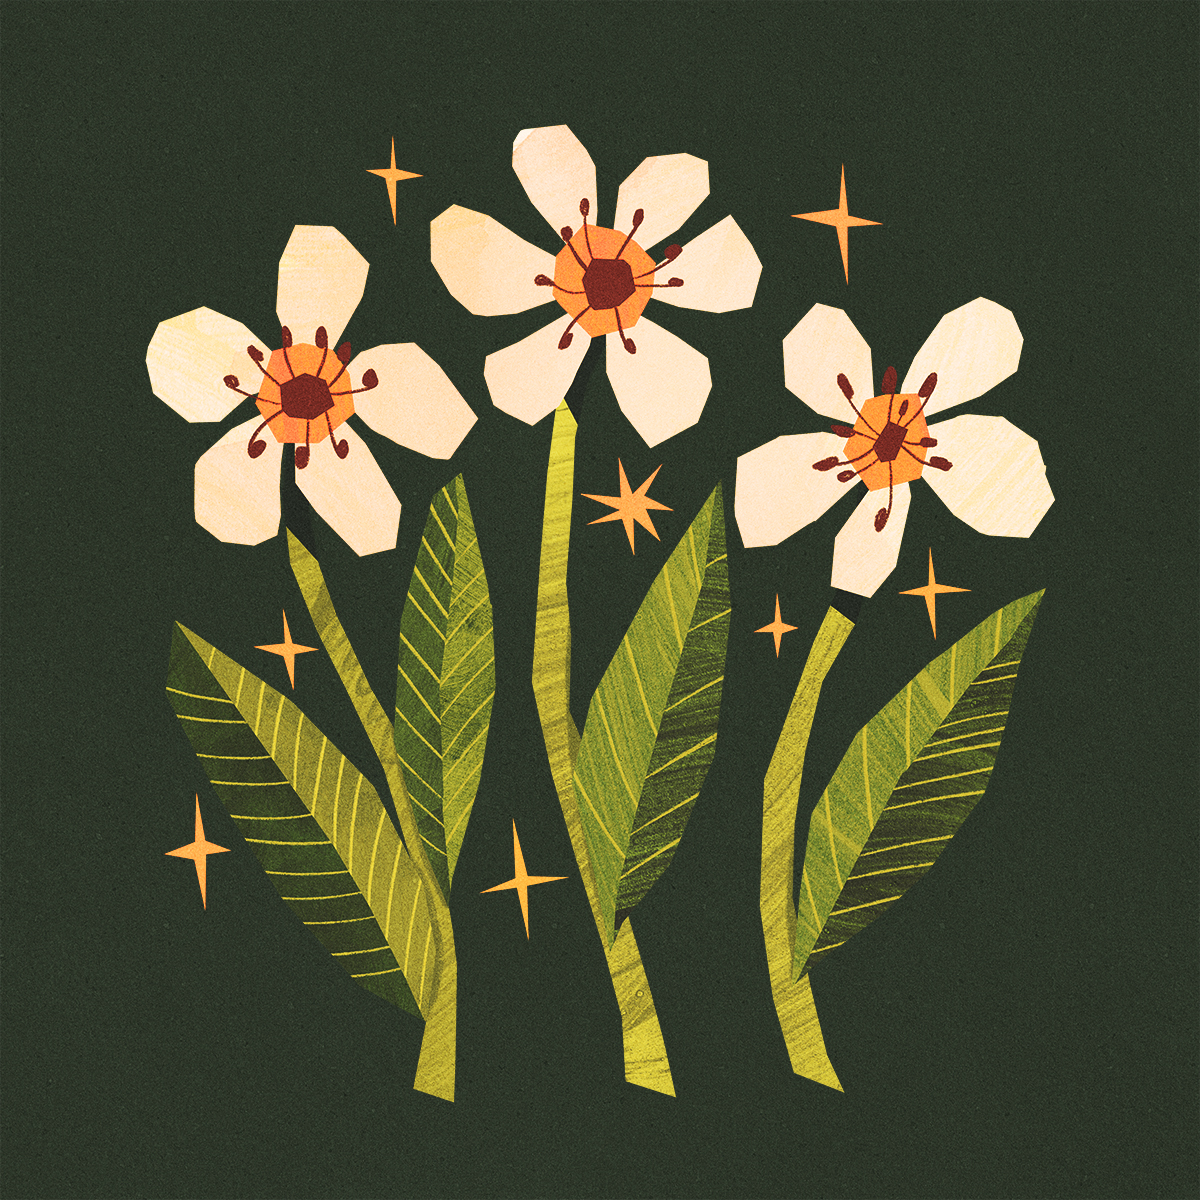 Didn't think of any specific flower while I was making these but they kinda remind me of wood anemones which I love :')